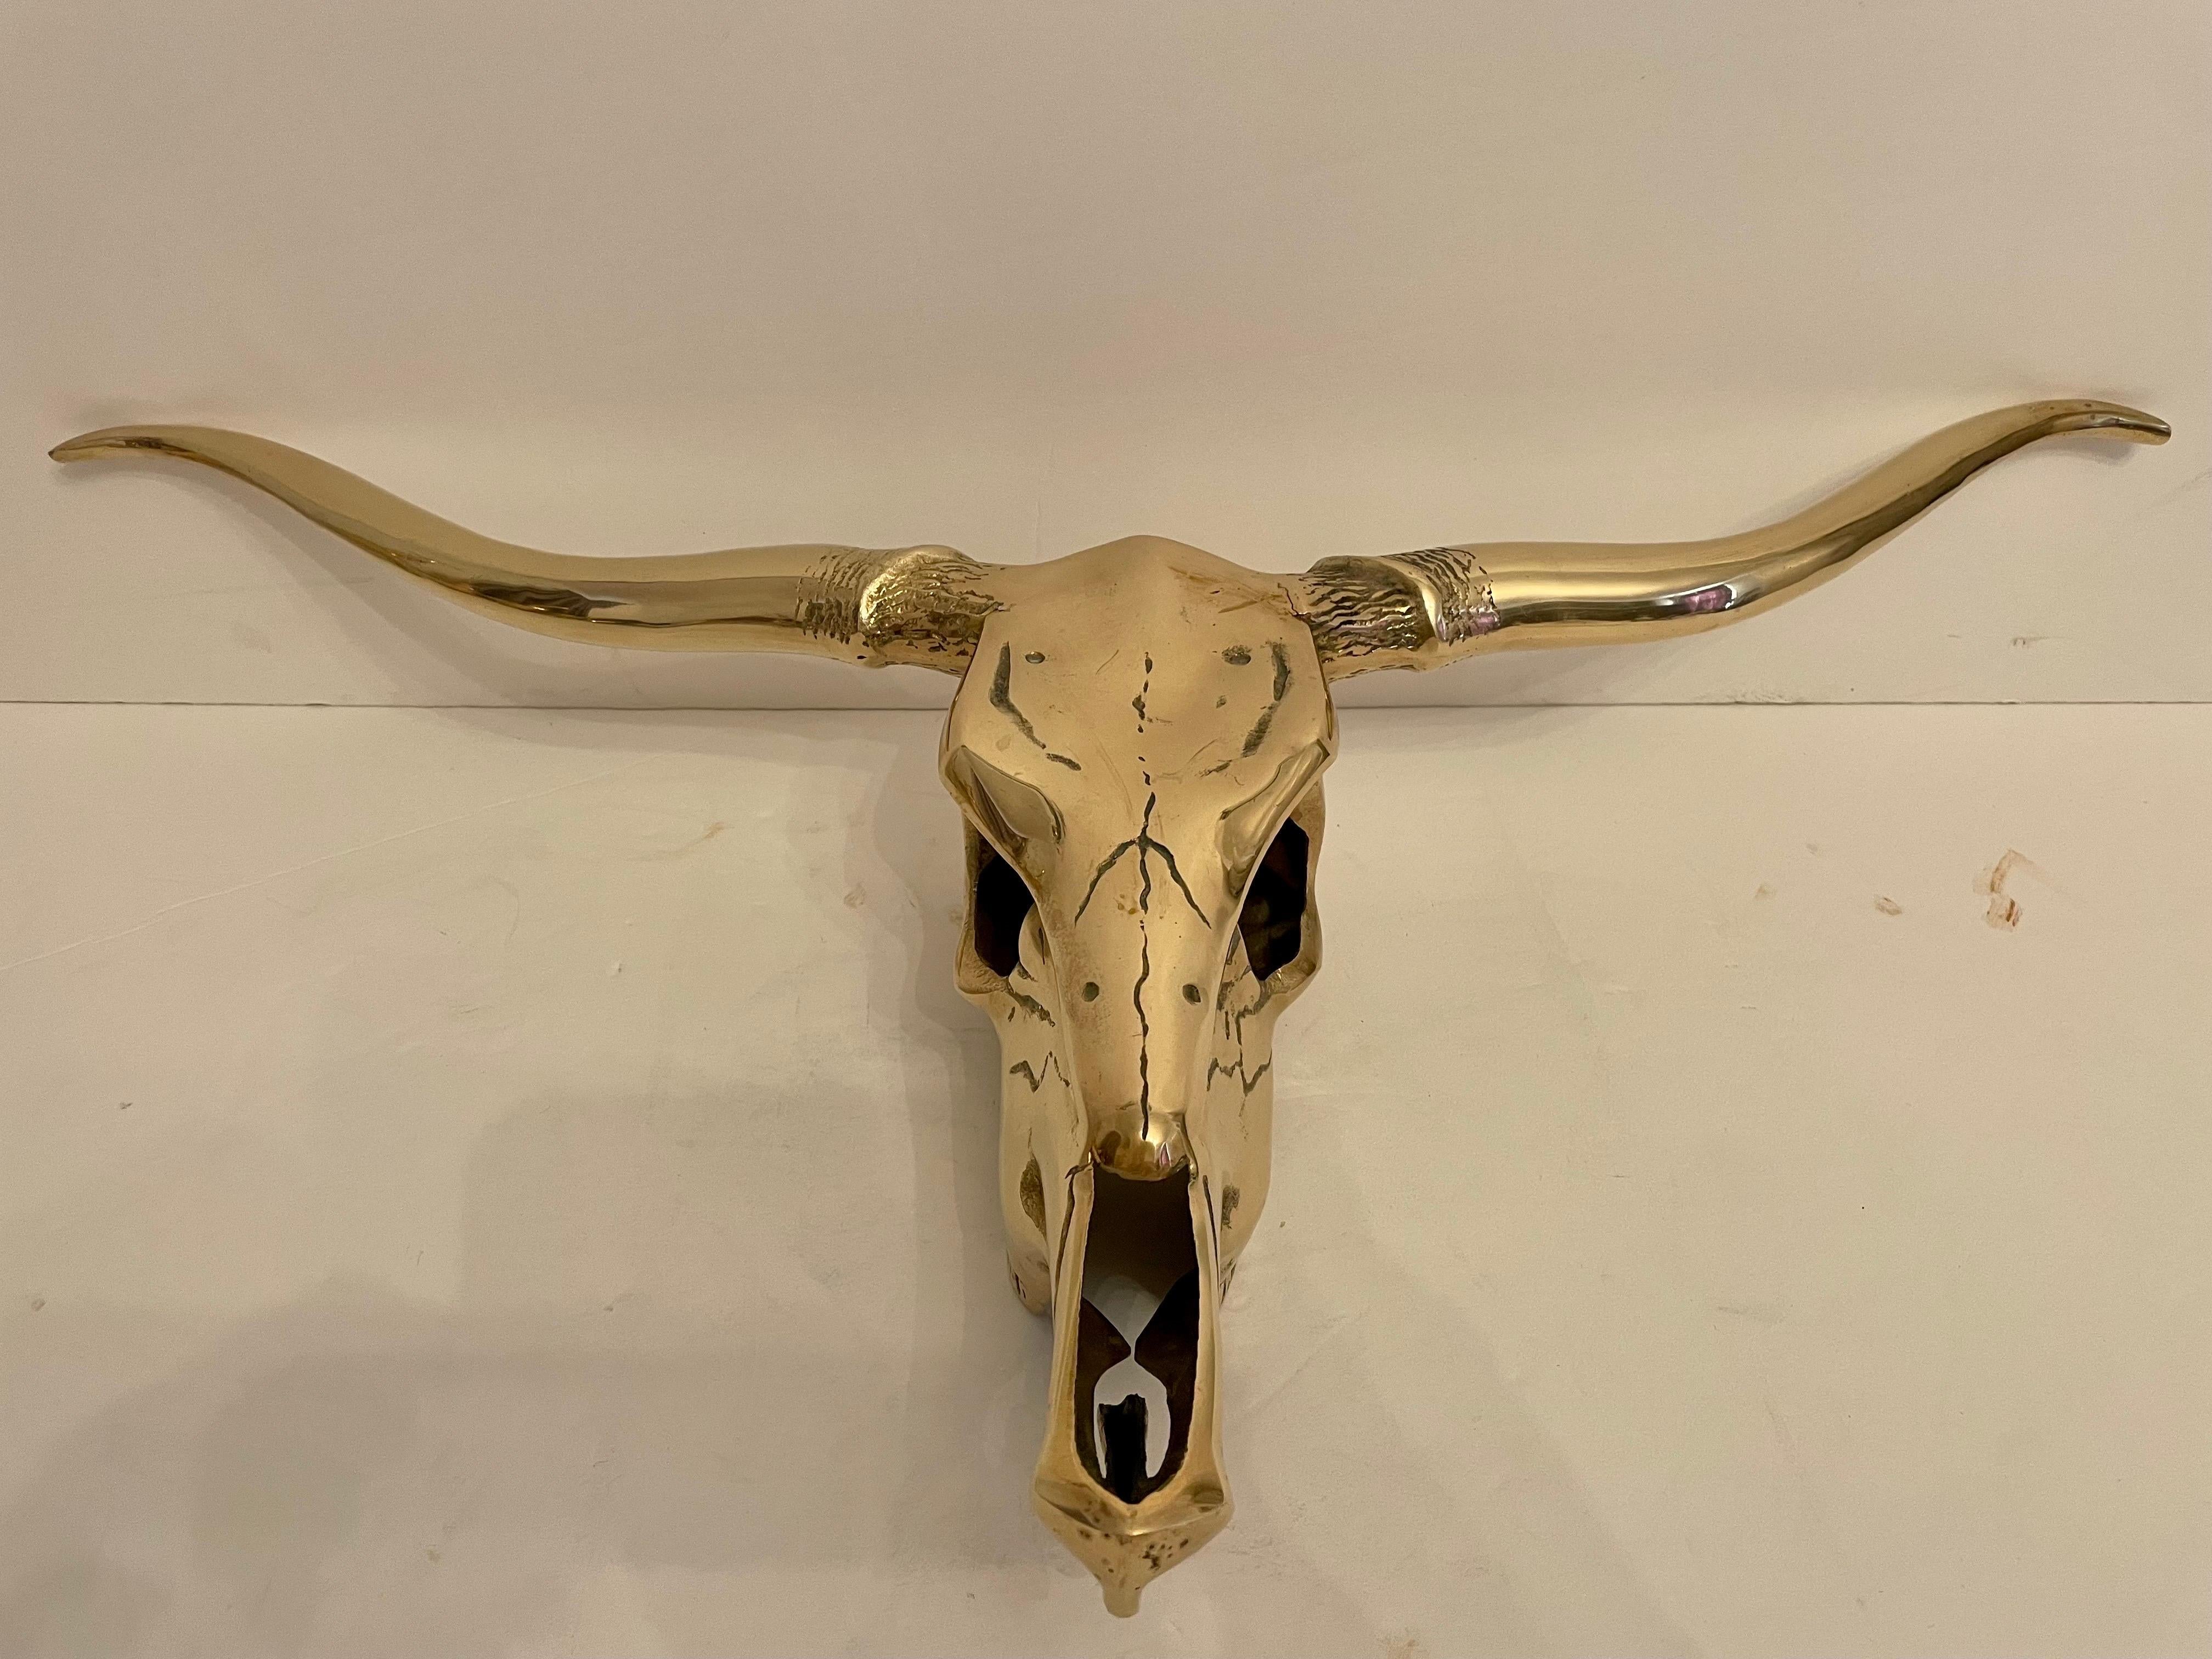 Circa mid-20th century Hollywood Regency style decorative brass longhorn skull wall sculpture in a hand polished finish. Please note of wear consistent with age. Good overall condition. Large scale